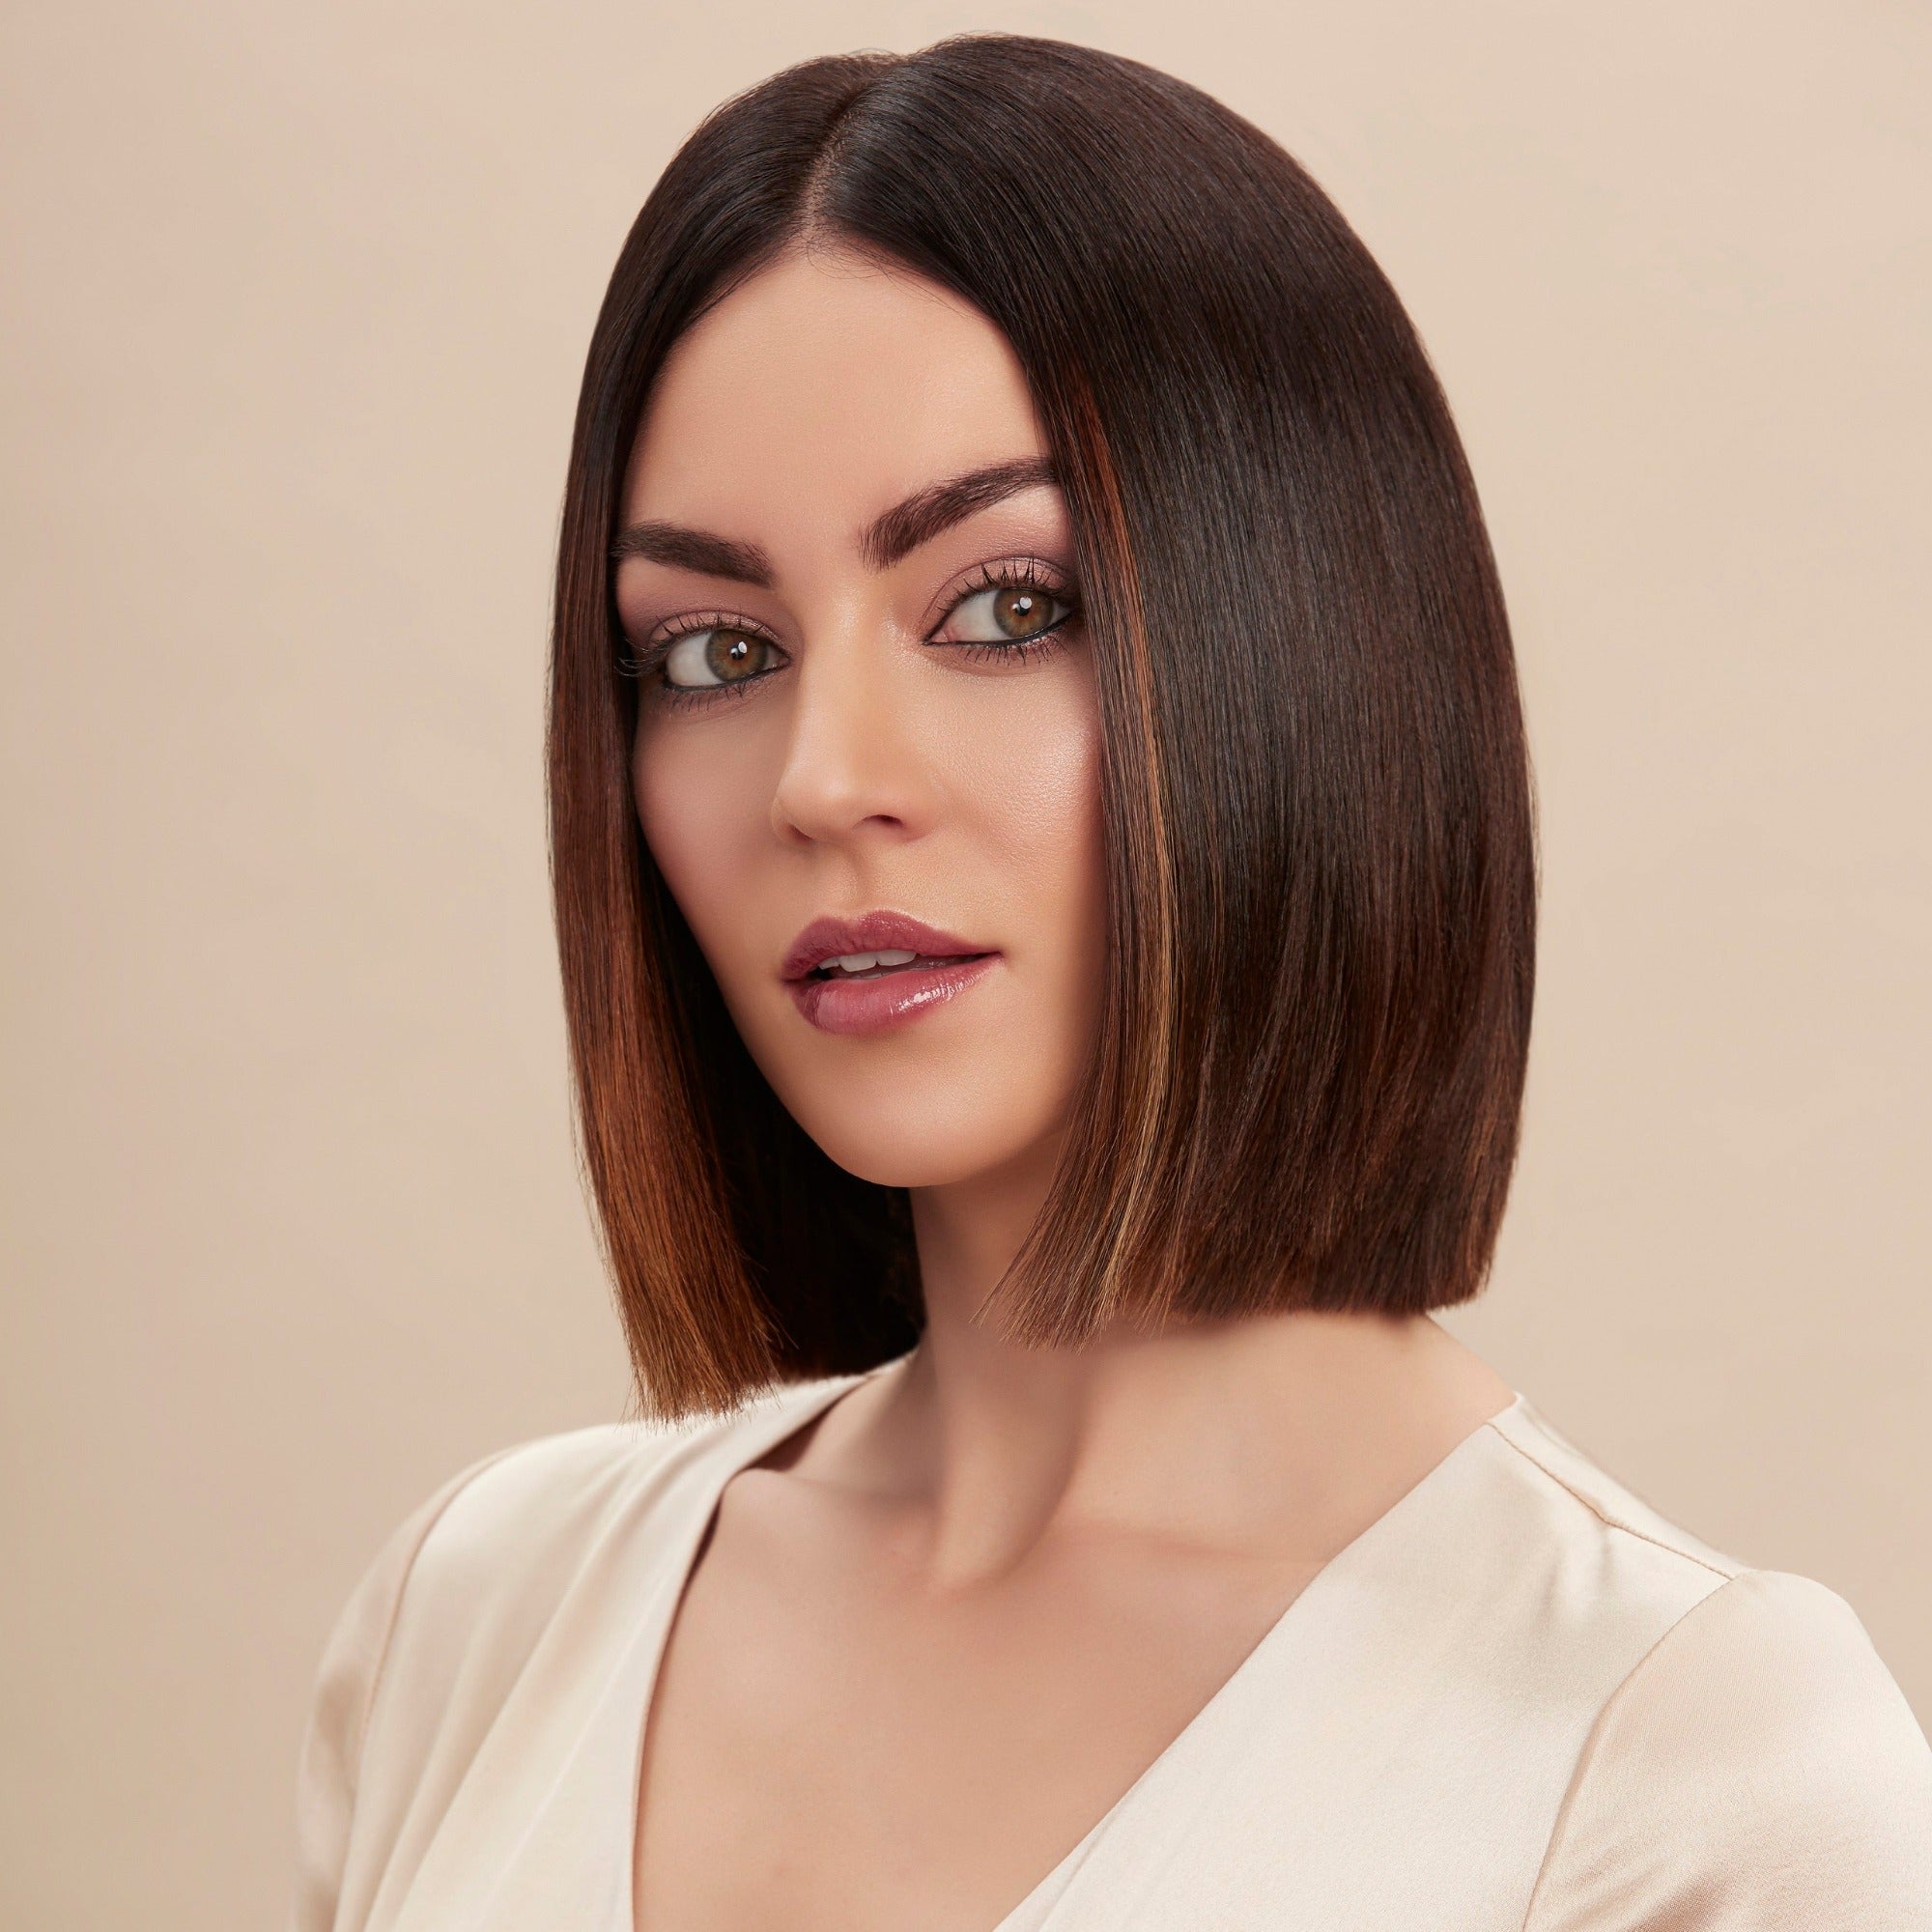 Female model with a super straight brunette bob from using Moo and Yoo Miracle Conditioner and every hair is kept in place by Moo and Yoo Hair Spray. She has super shiny hair. She is looking at the camera and is wearing a neutral coloured blouse.